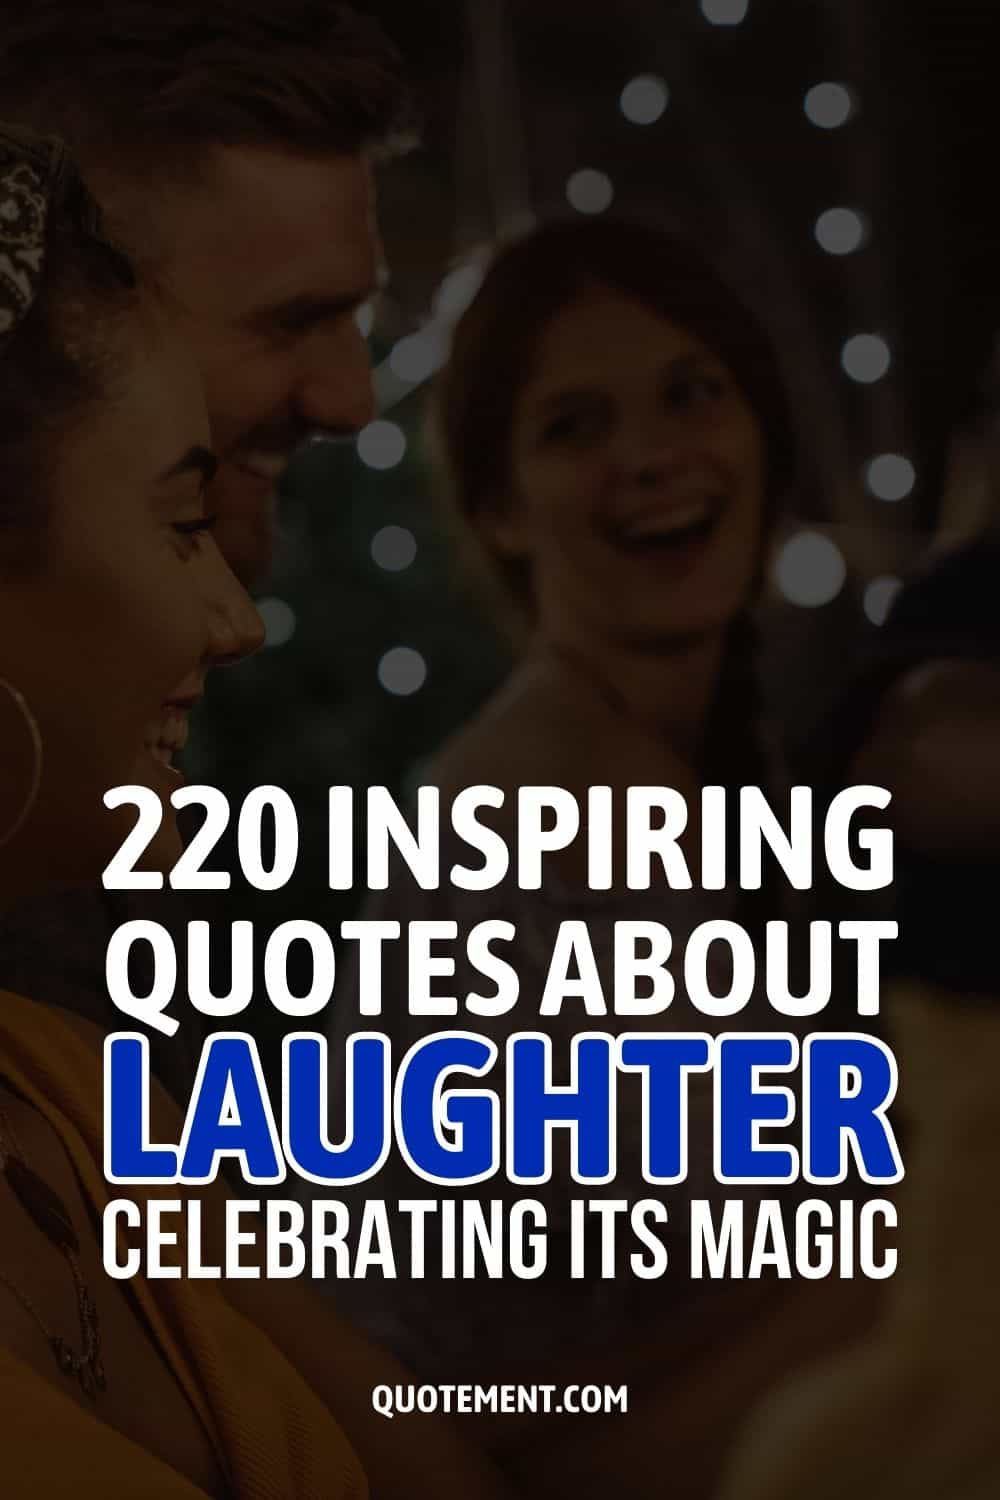 220 Inspiring Quotes About Laughter Celebrating Its Magic